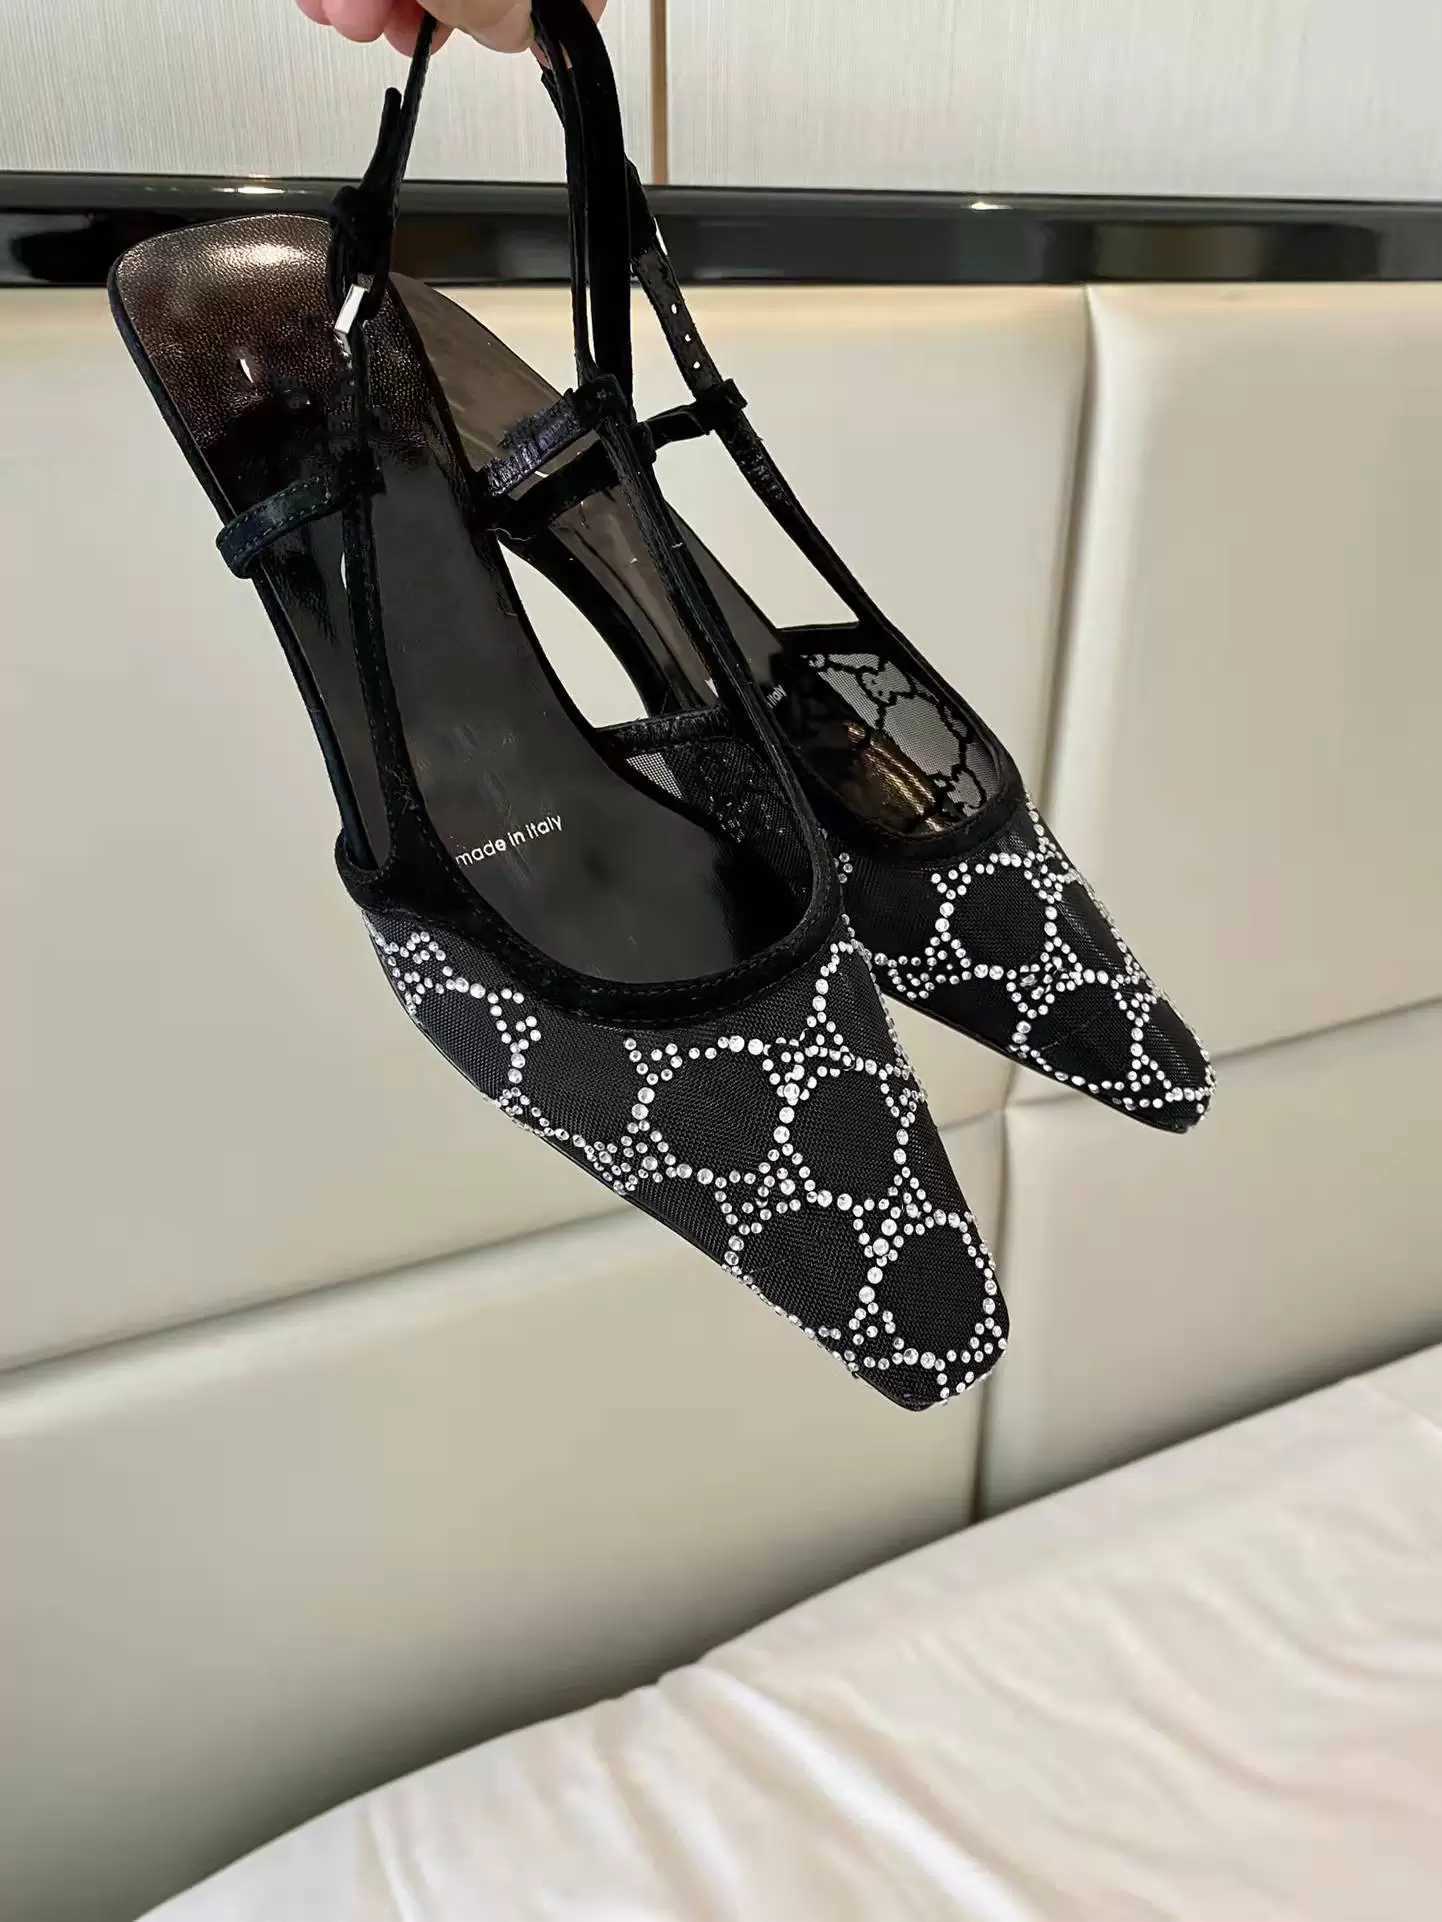 Other Shoes 2022 LUXURY Women's G slingback Sandals pump Aria slingback shoes are presented in Black mesh with crystals sparkling motif Back buckle